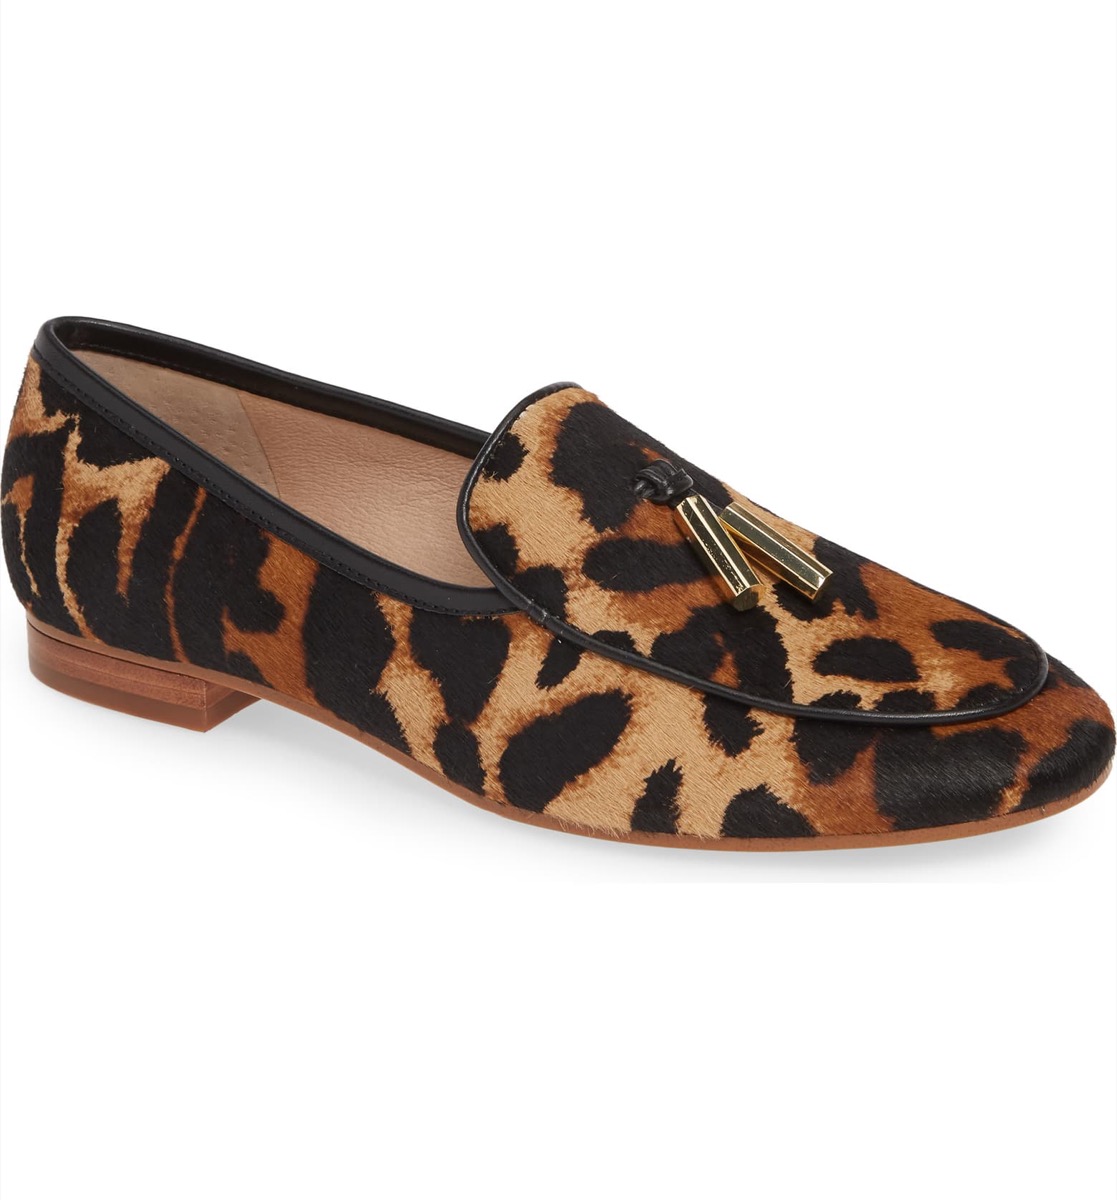 leopard print loafers, Nordstrom anniversary sale